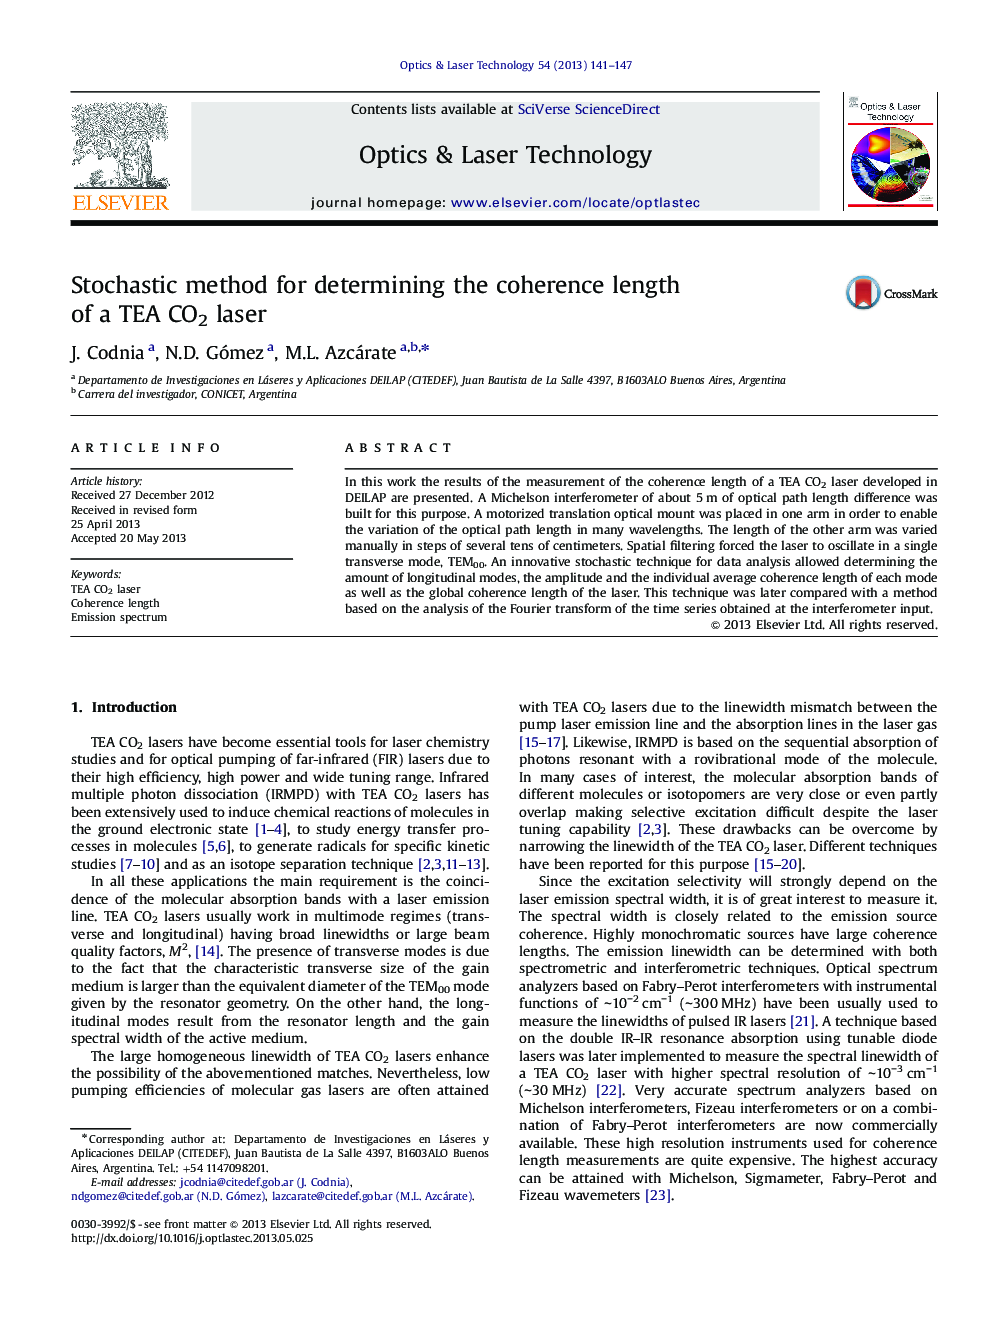 Stochastic method for determining the coherence length of a TEA CO2 laser